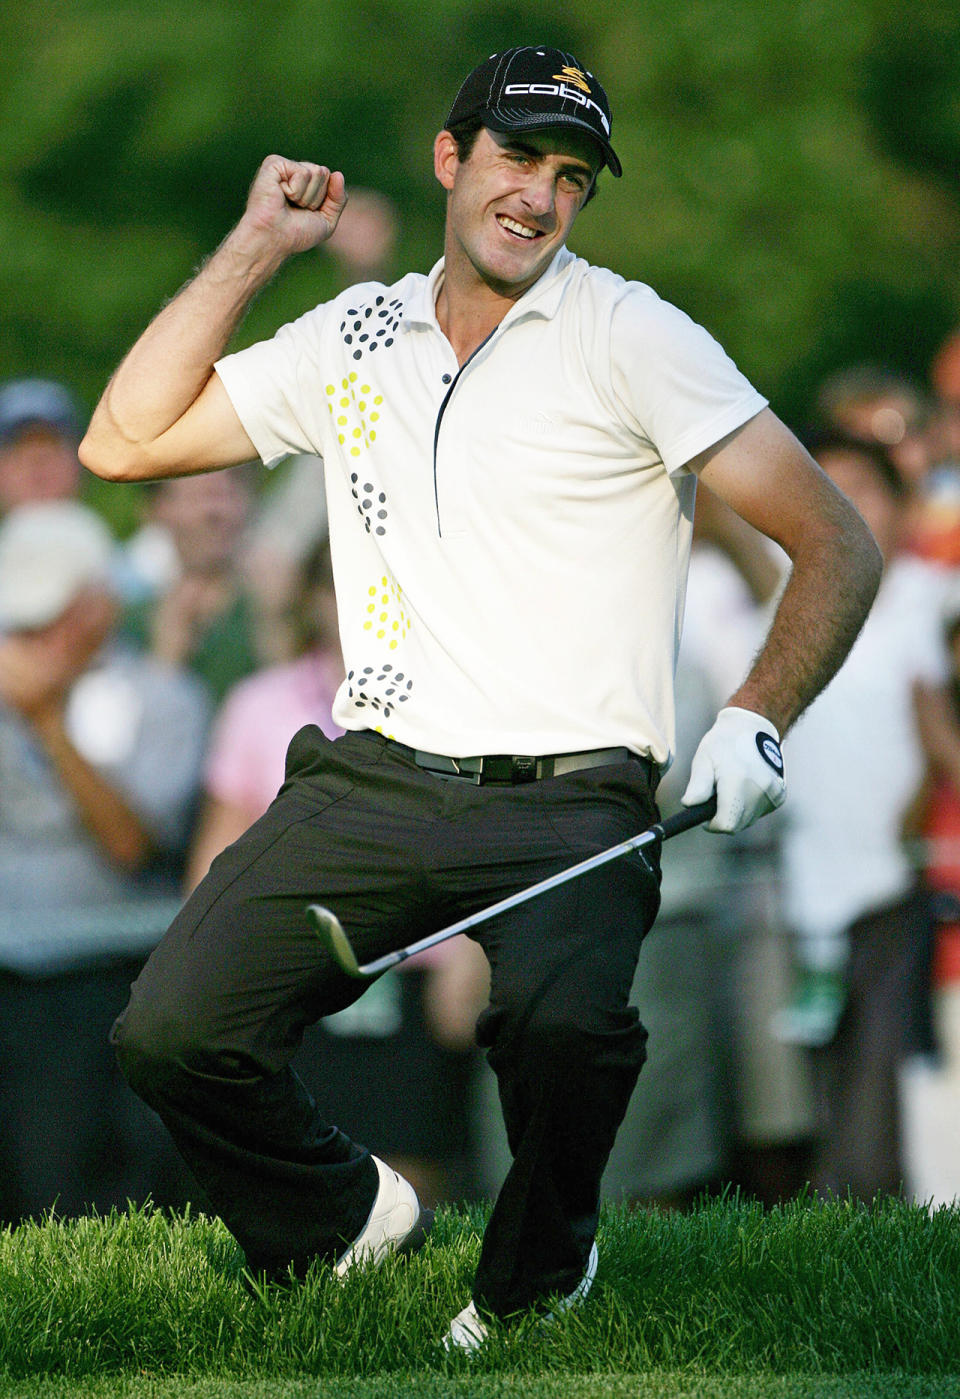 Geoff Ogilvy celebrates a chip in at 17 during the final round play at the 106th US Open at the Winged Foot Golf Club in Maraoneck, New York. Ogilvy won the championship after Phil Mickelson made double bogey at the 18th hole. (TIM SLOAN/AFP via Getty Images)